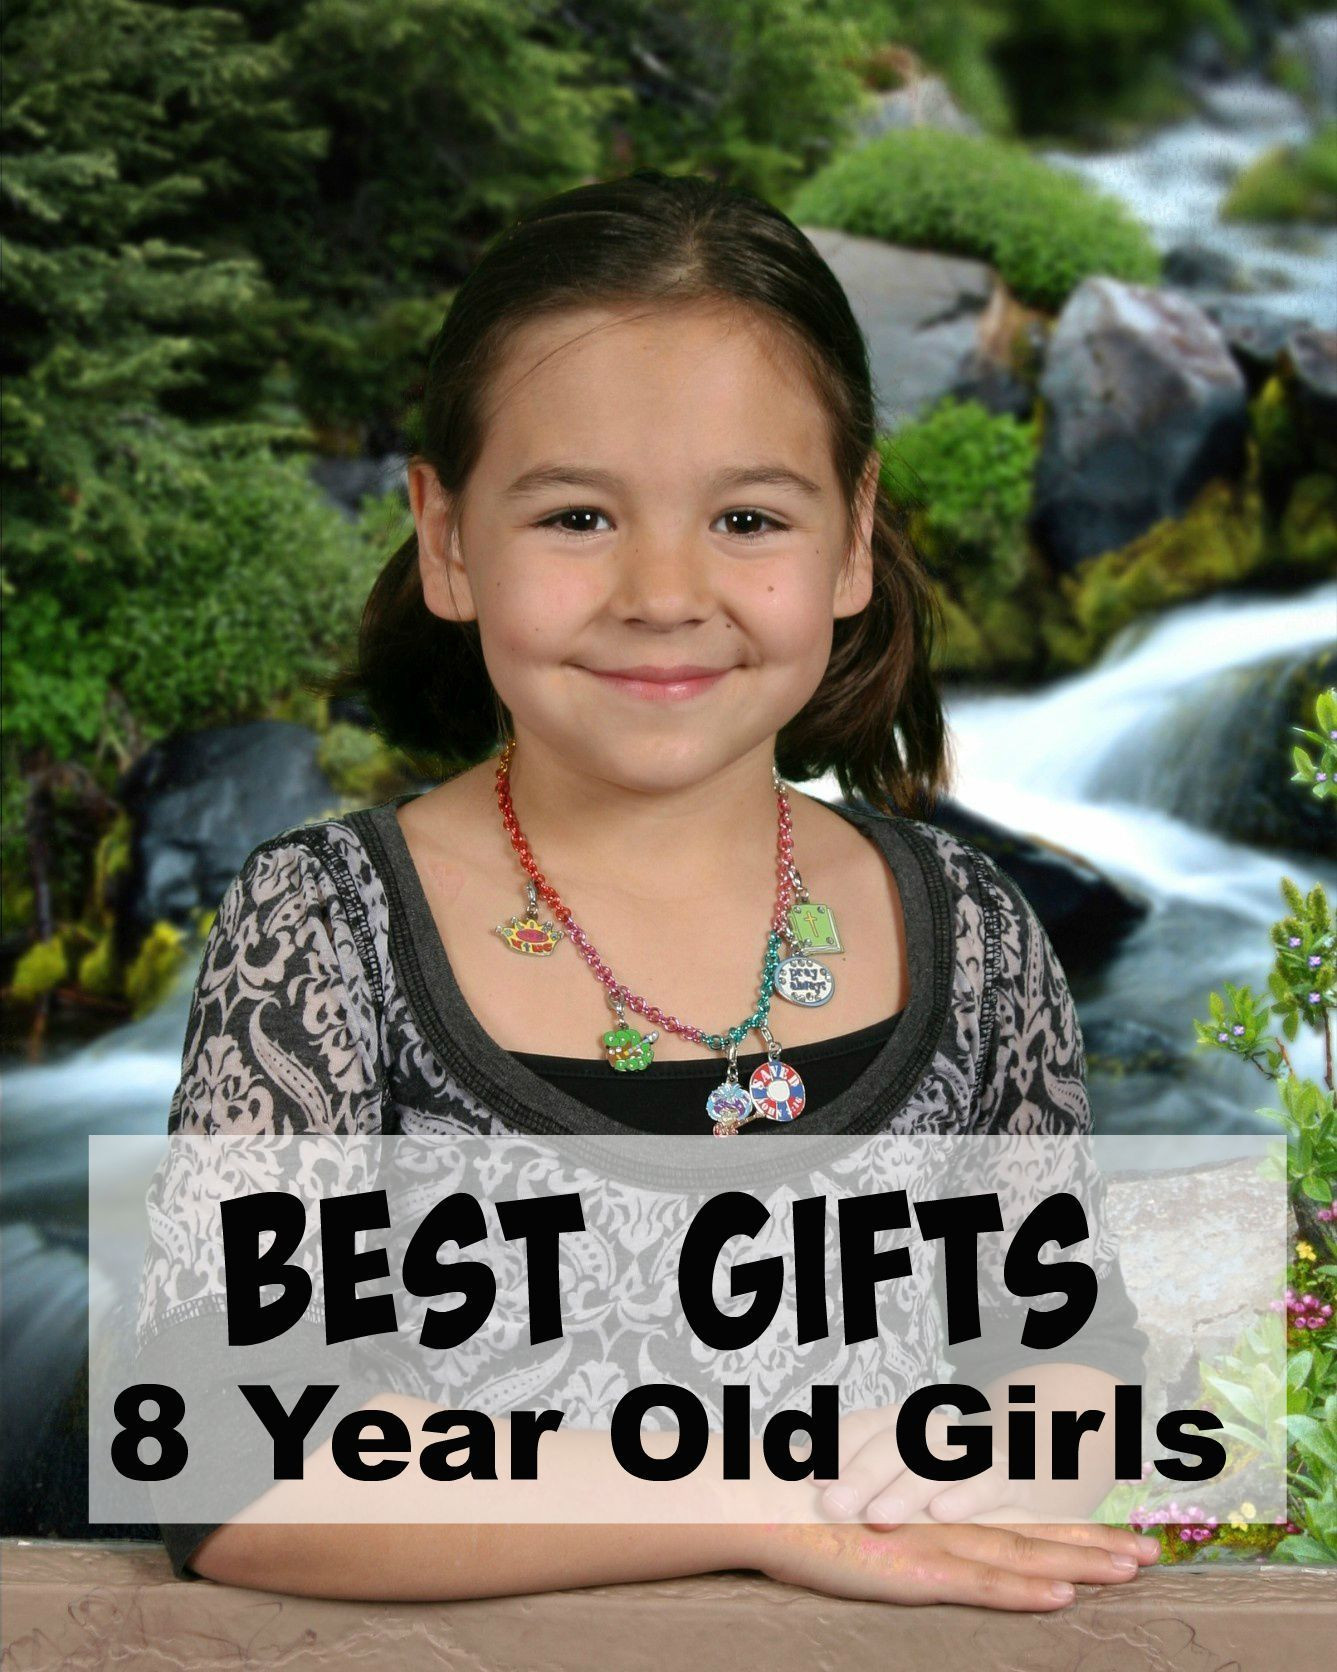 Girls Gift Ideas Age 8
 25 Spectacular Gift Ideas For 8 Year Old Girls That WILL